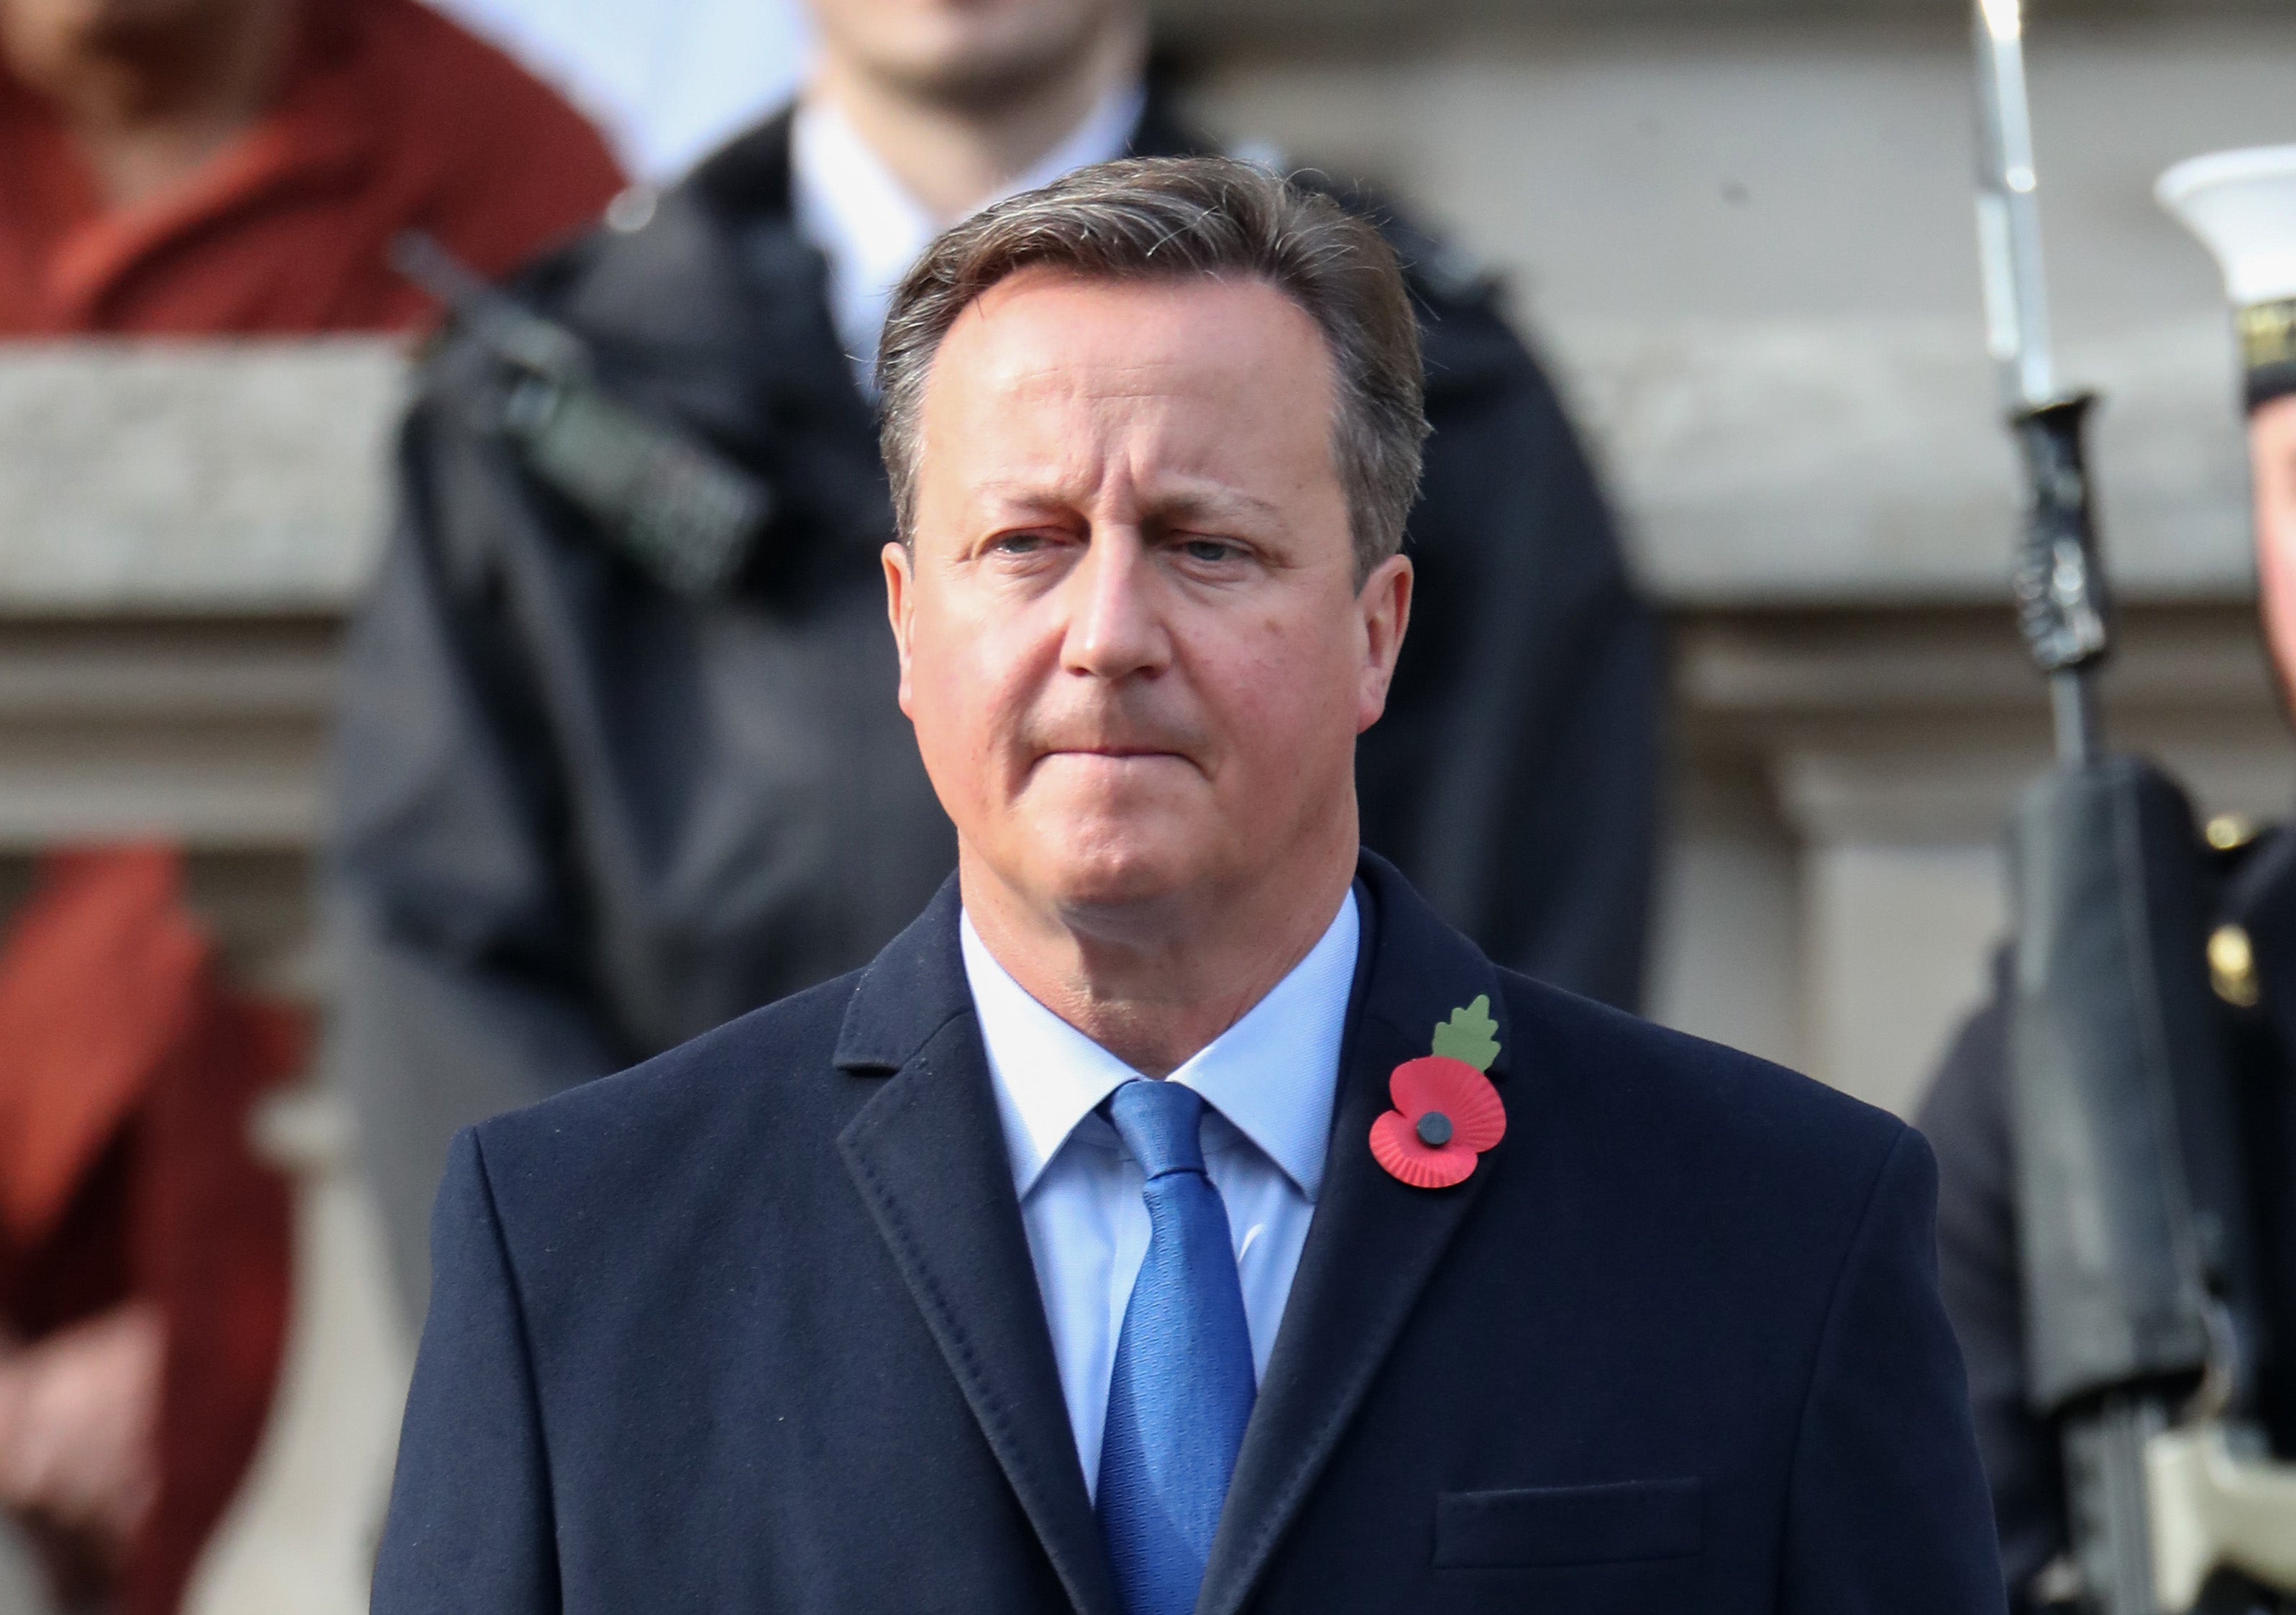 Former prime minister David Cameron is under scrutiny for his dealings with Greensill Capital